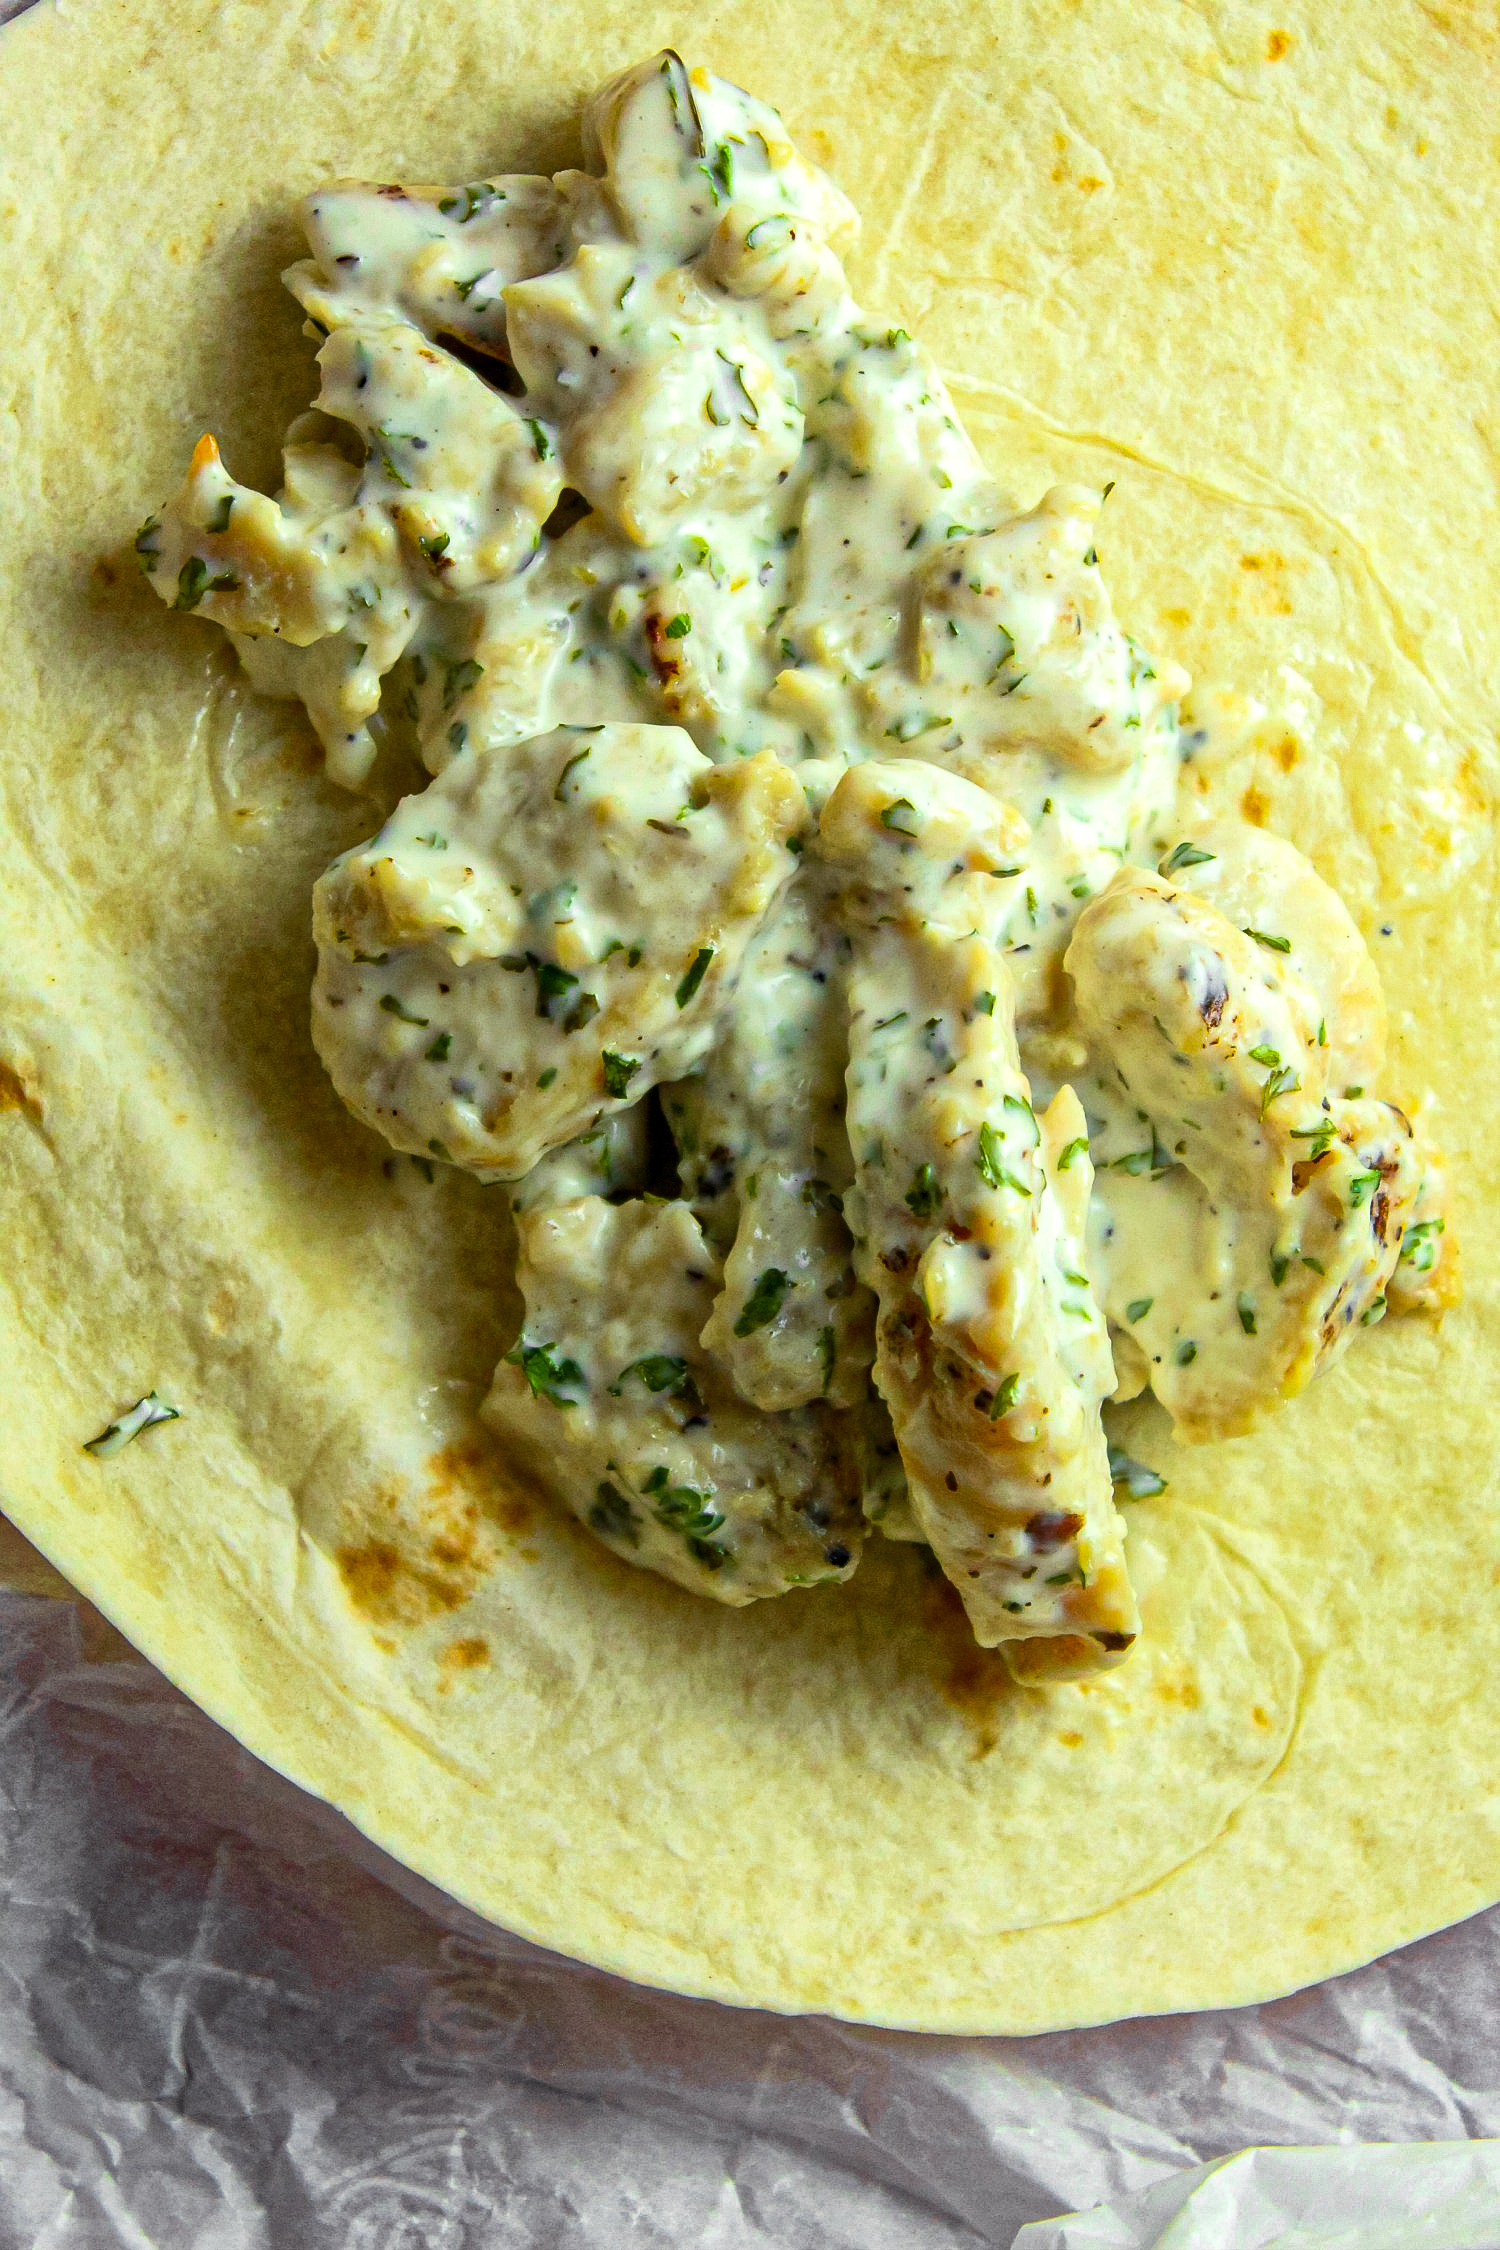 Lay chicken on tortilla, top with cheese and cover with ranch dressing.